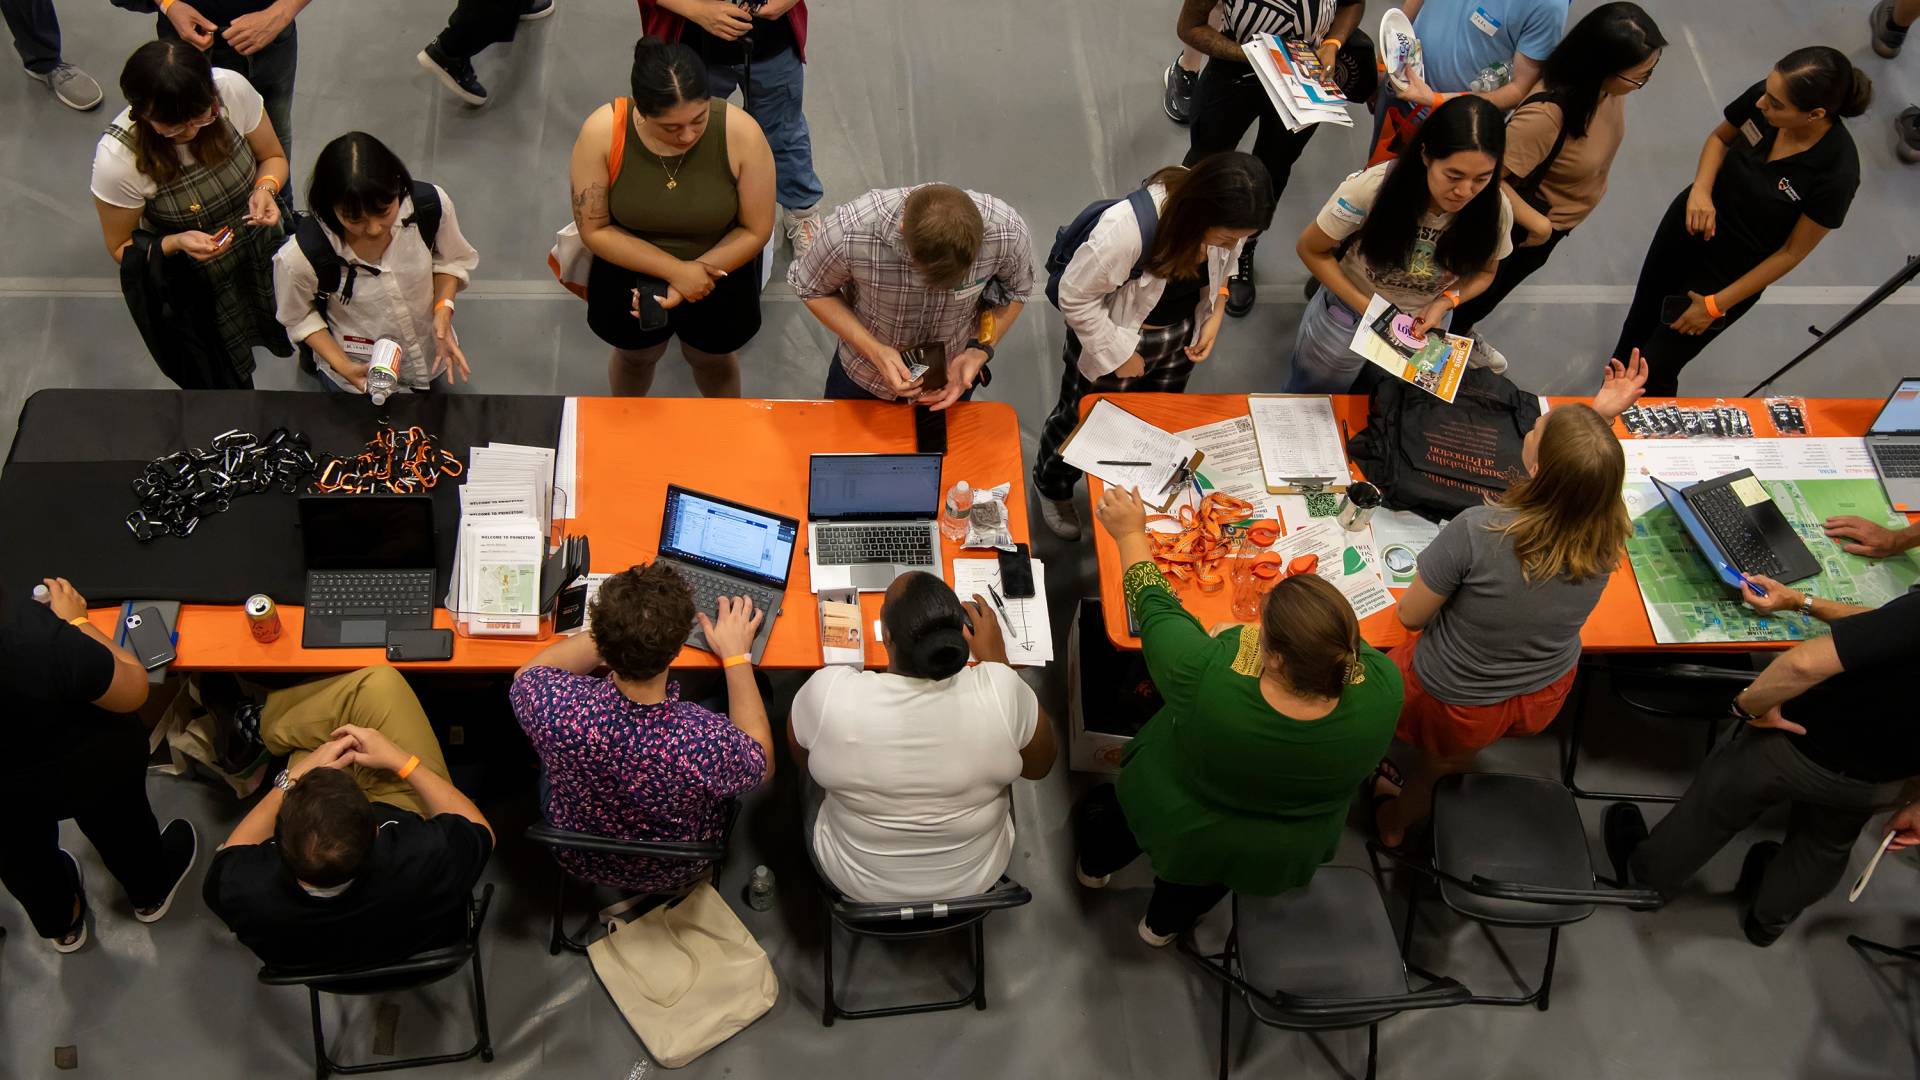 Bird's eye view of students at a table